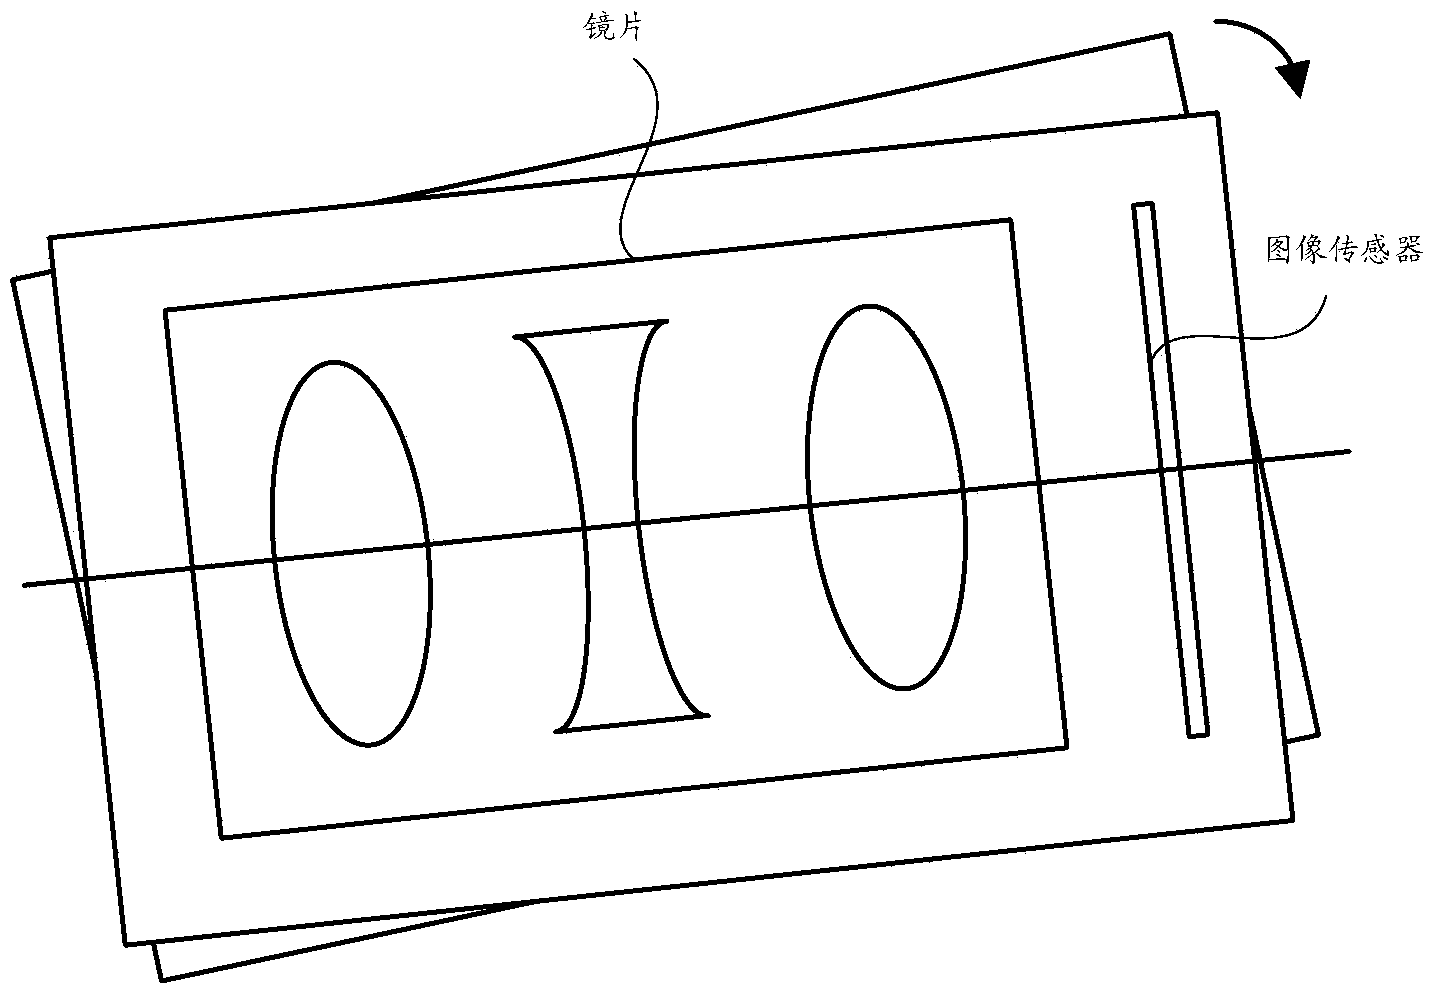 Optical imaging device, optical system and mobile terminal